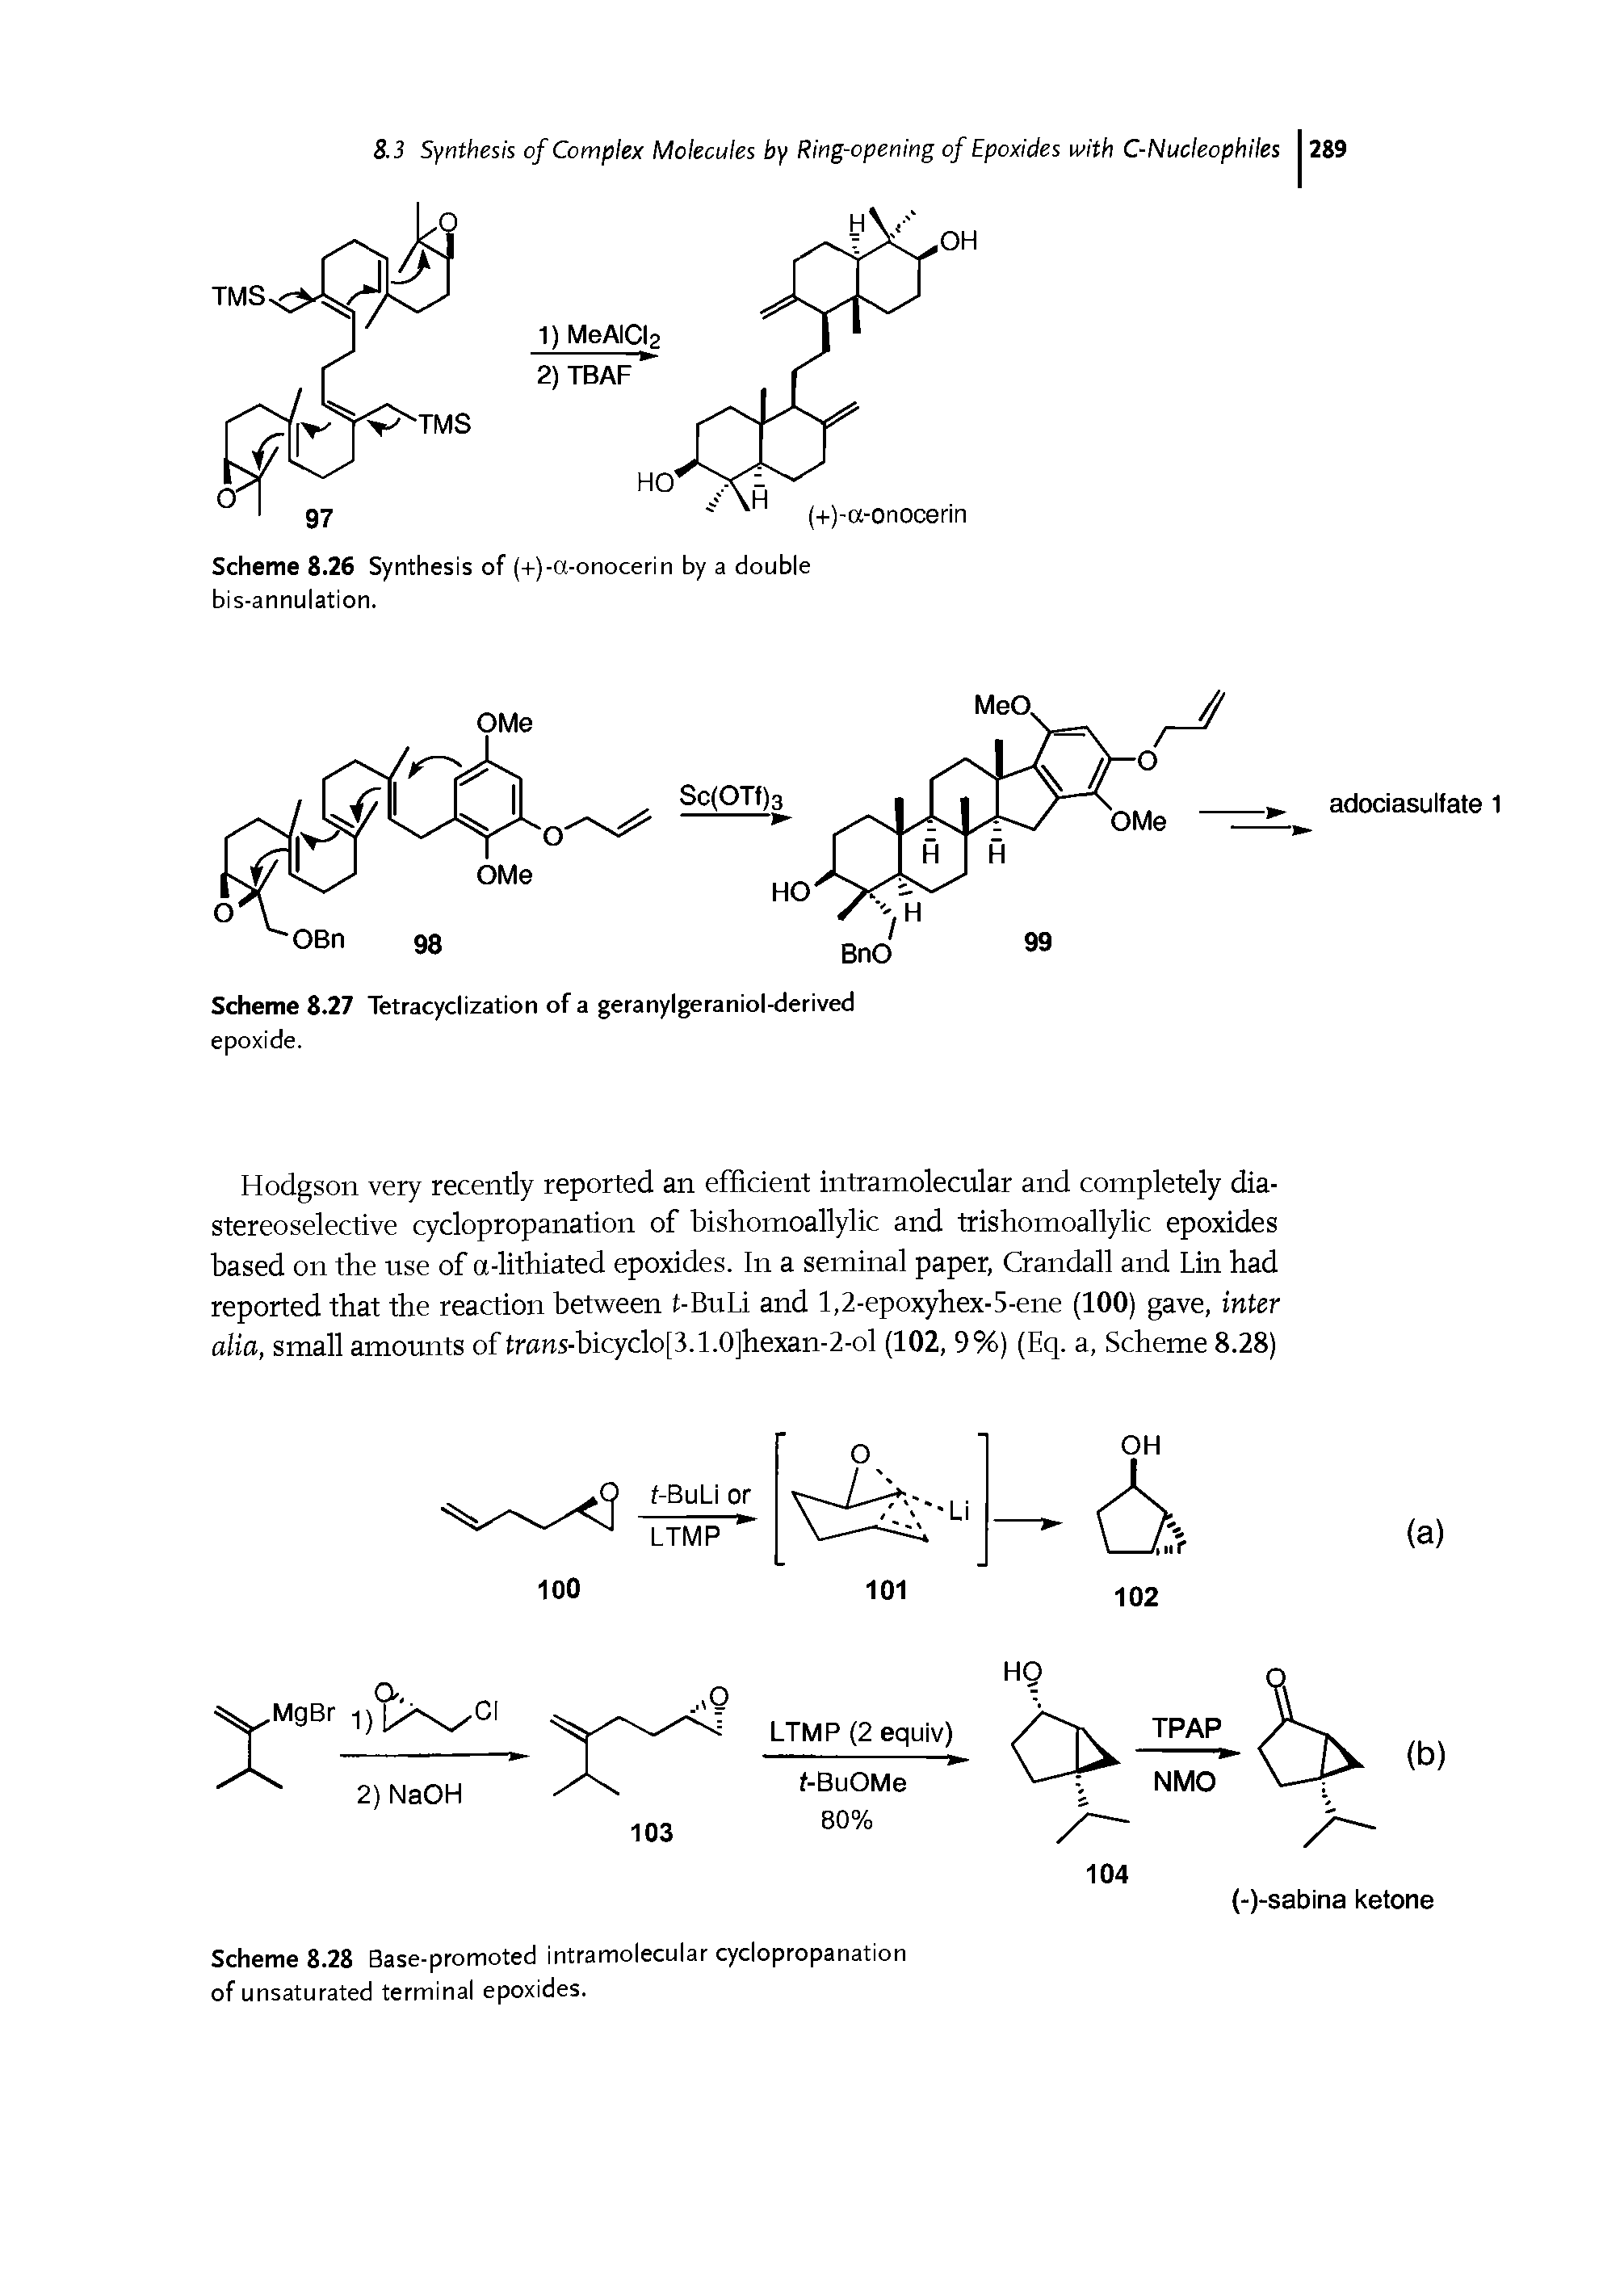 Scheme 8.28 Base-promoted intramolecular cyclopropanation of unsaturated terminal epoxides.